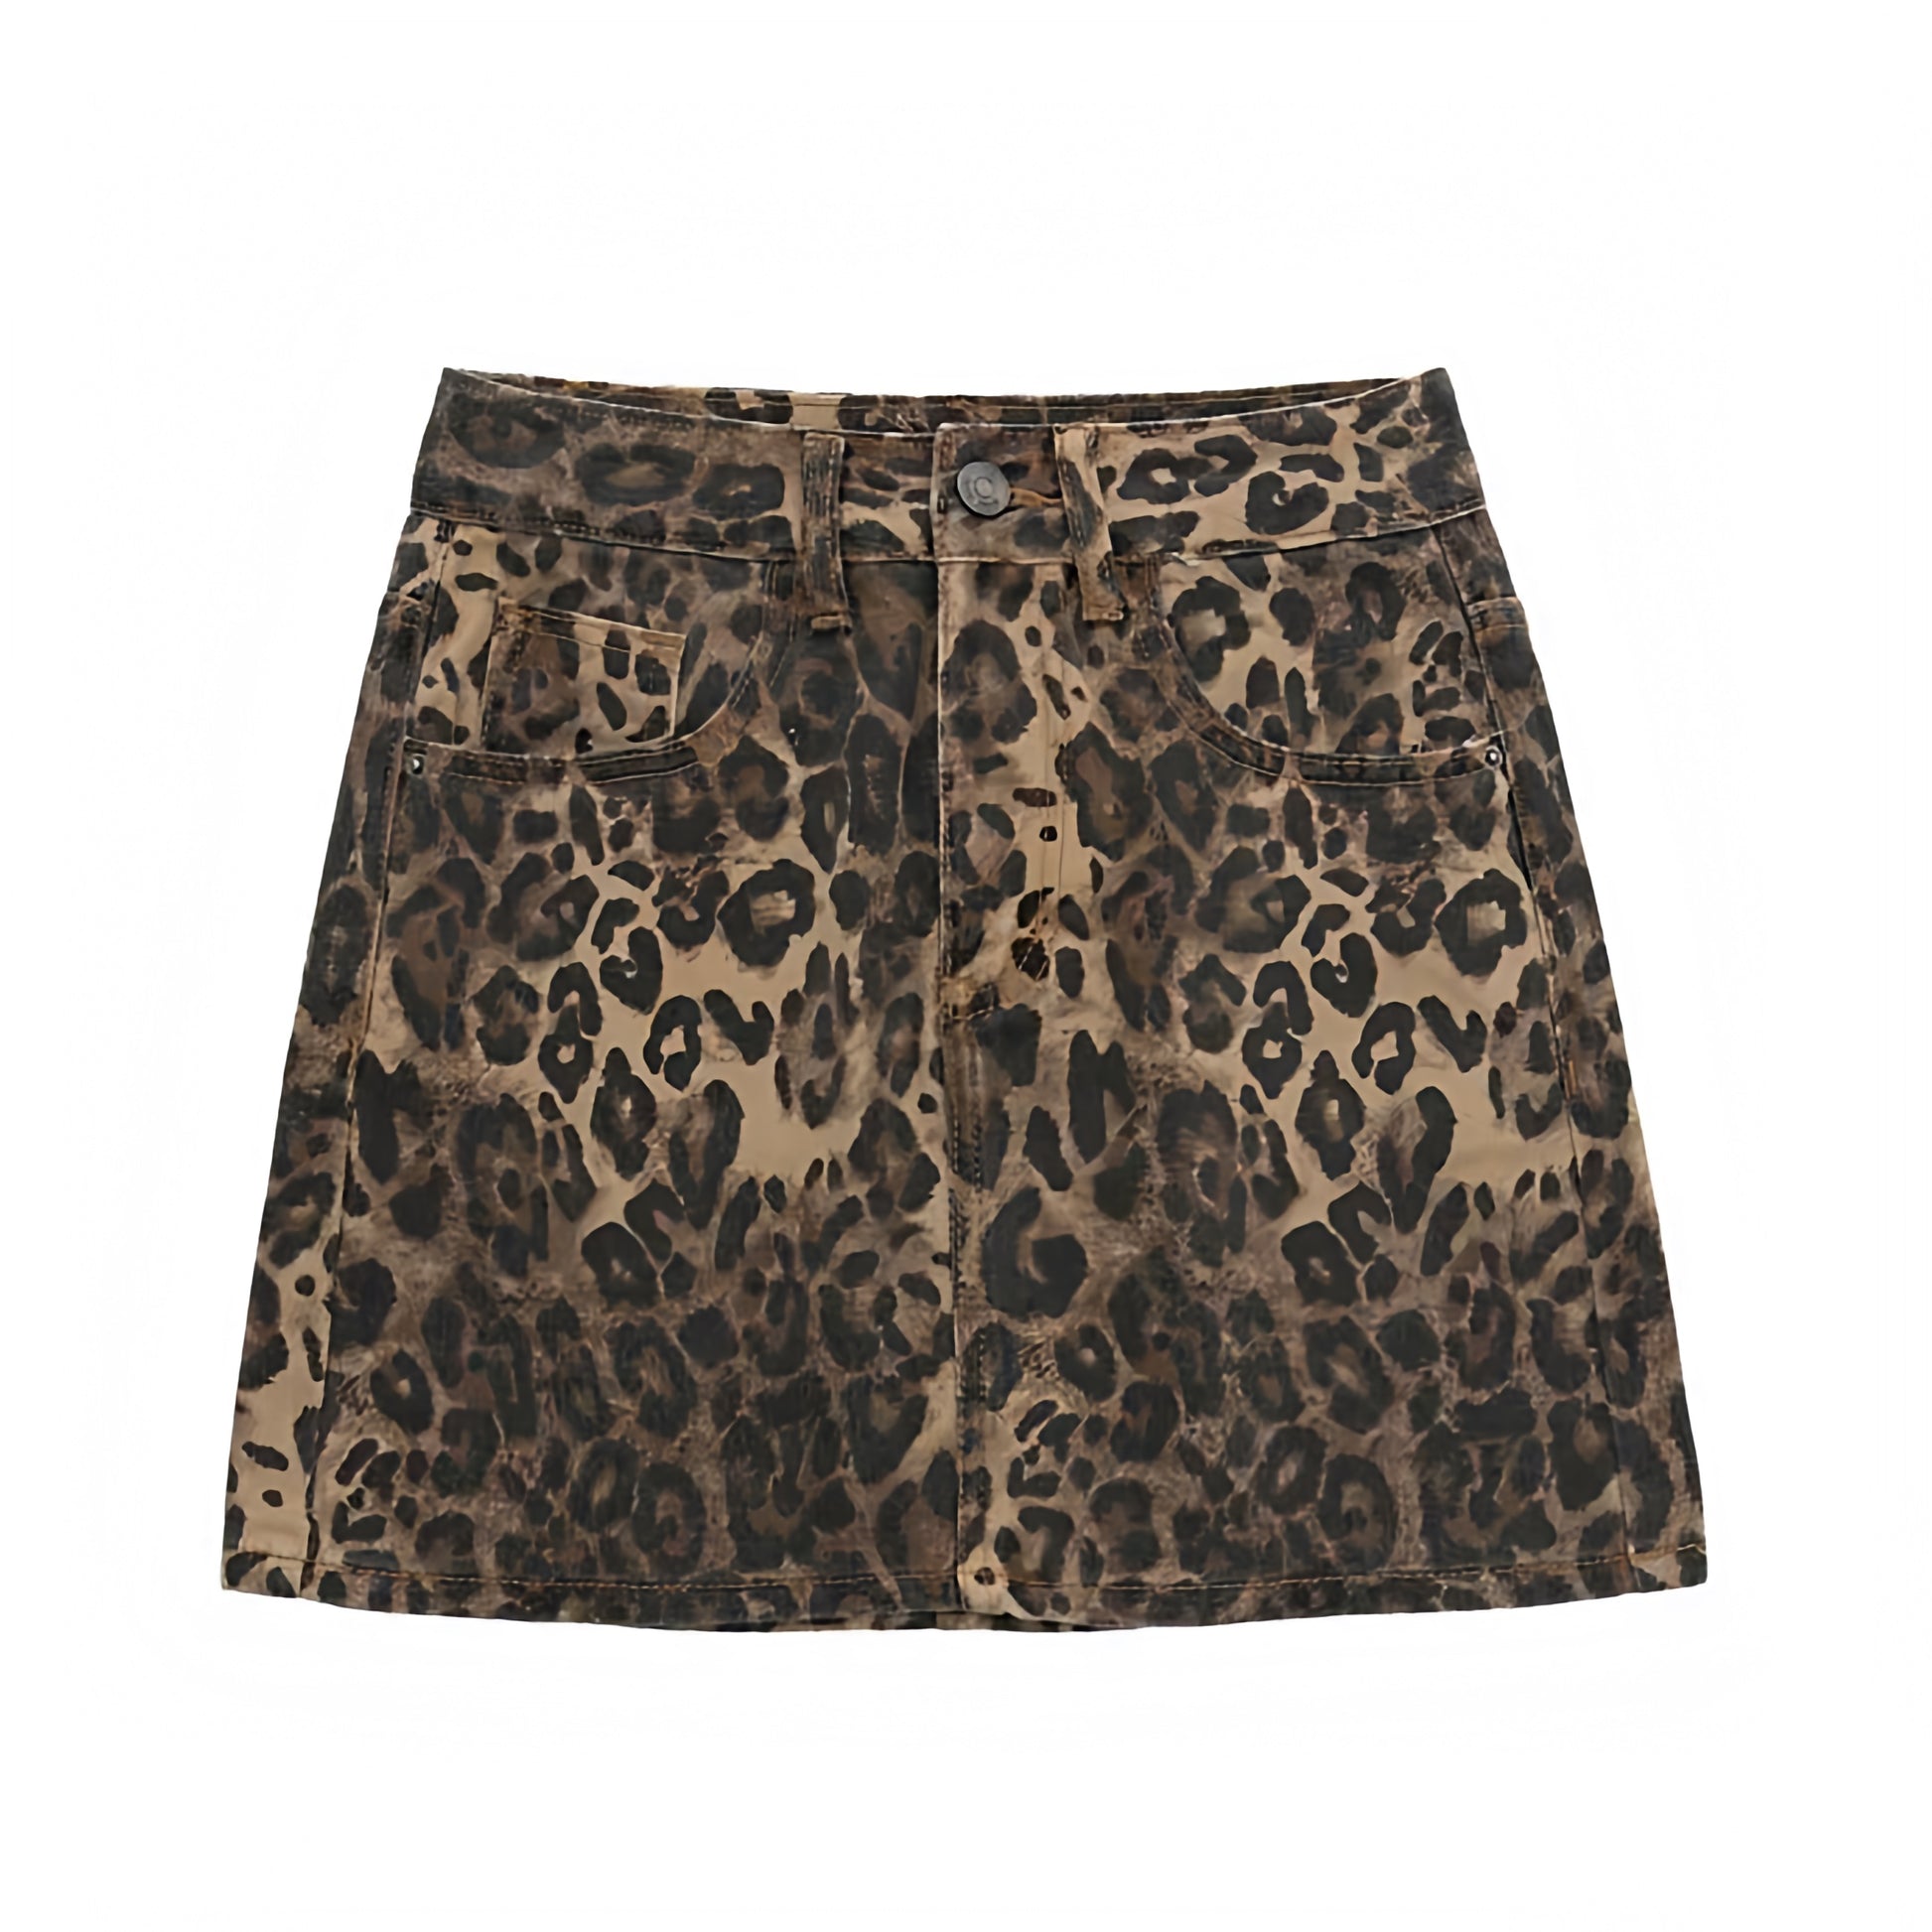 leopard-cheetah-animal-print-patterned-brown-black-multi-color-slim-tight-fit-mid-high-rise-waisted-denim-jean-short-mini-skirt-with-pockets-women-ladies-chic-trendy-spring-2024-summer-casual-classy-y2k-party-club-wear-sexy-date-night-out-exotic-zara-revolve-white-fox-jaded-london-princess-polly-edikted